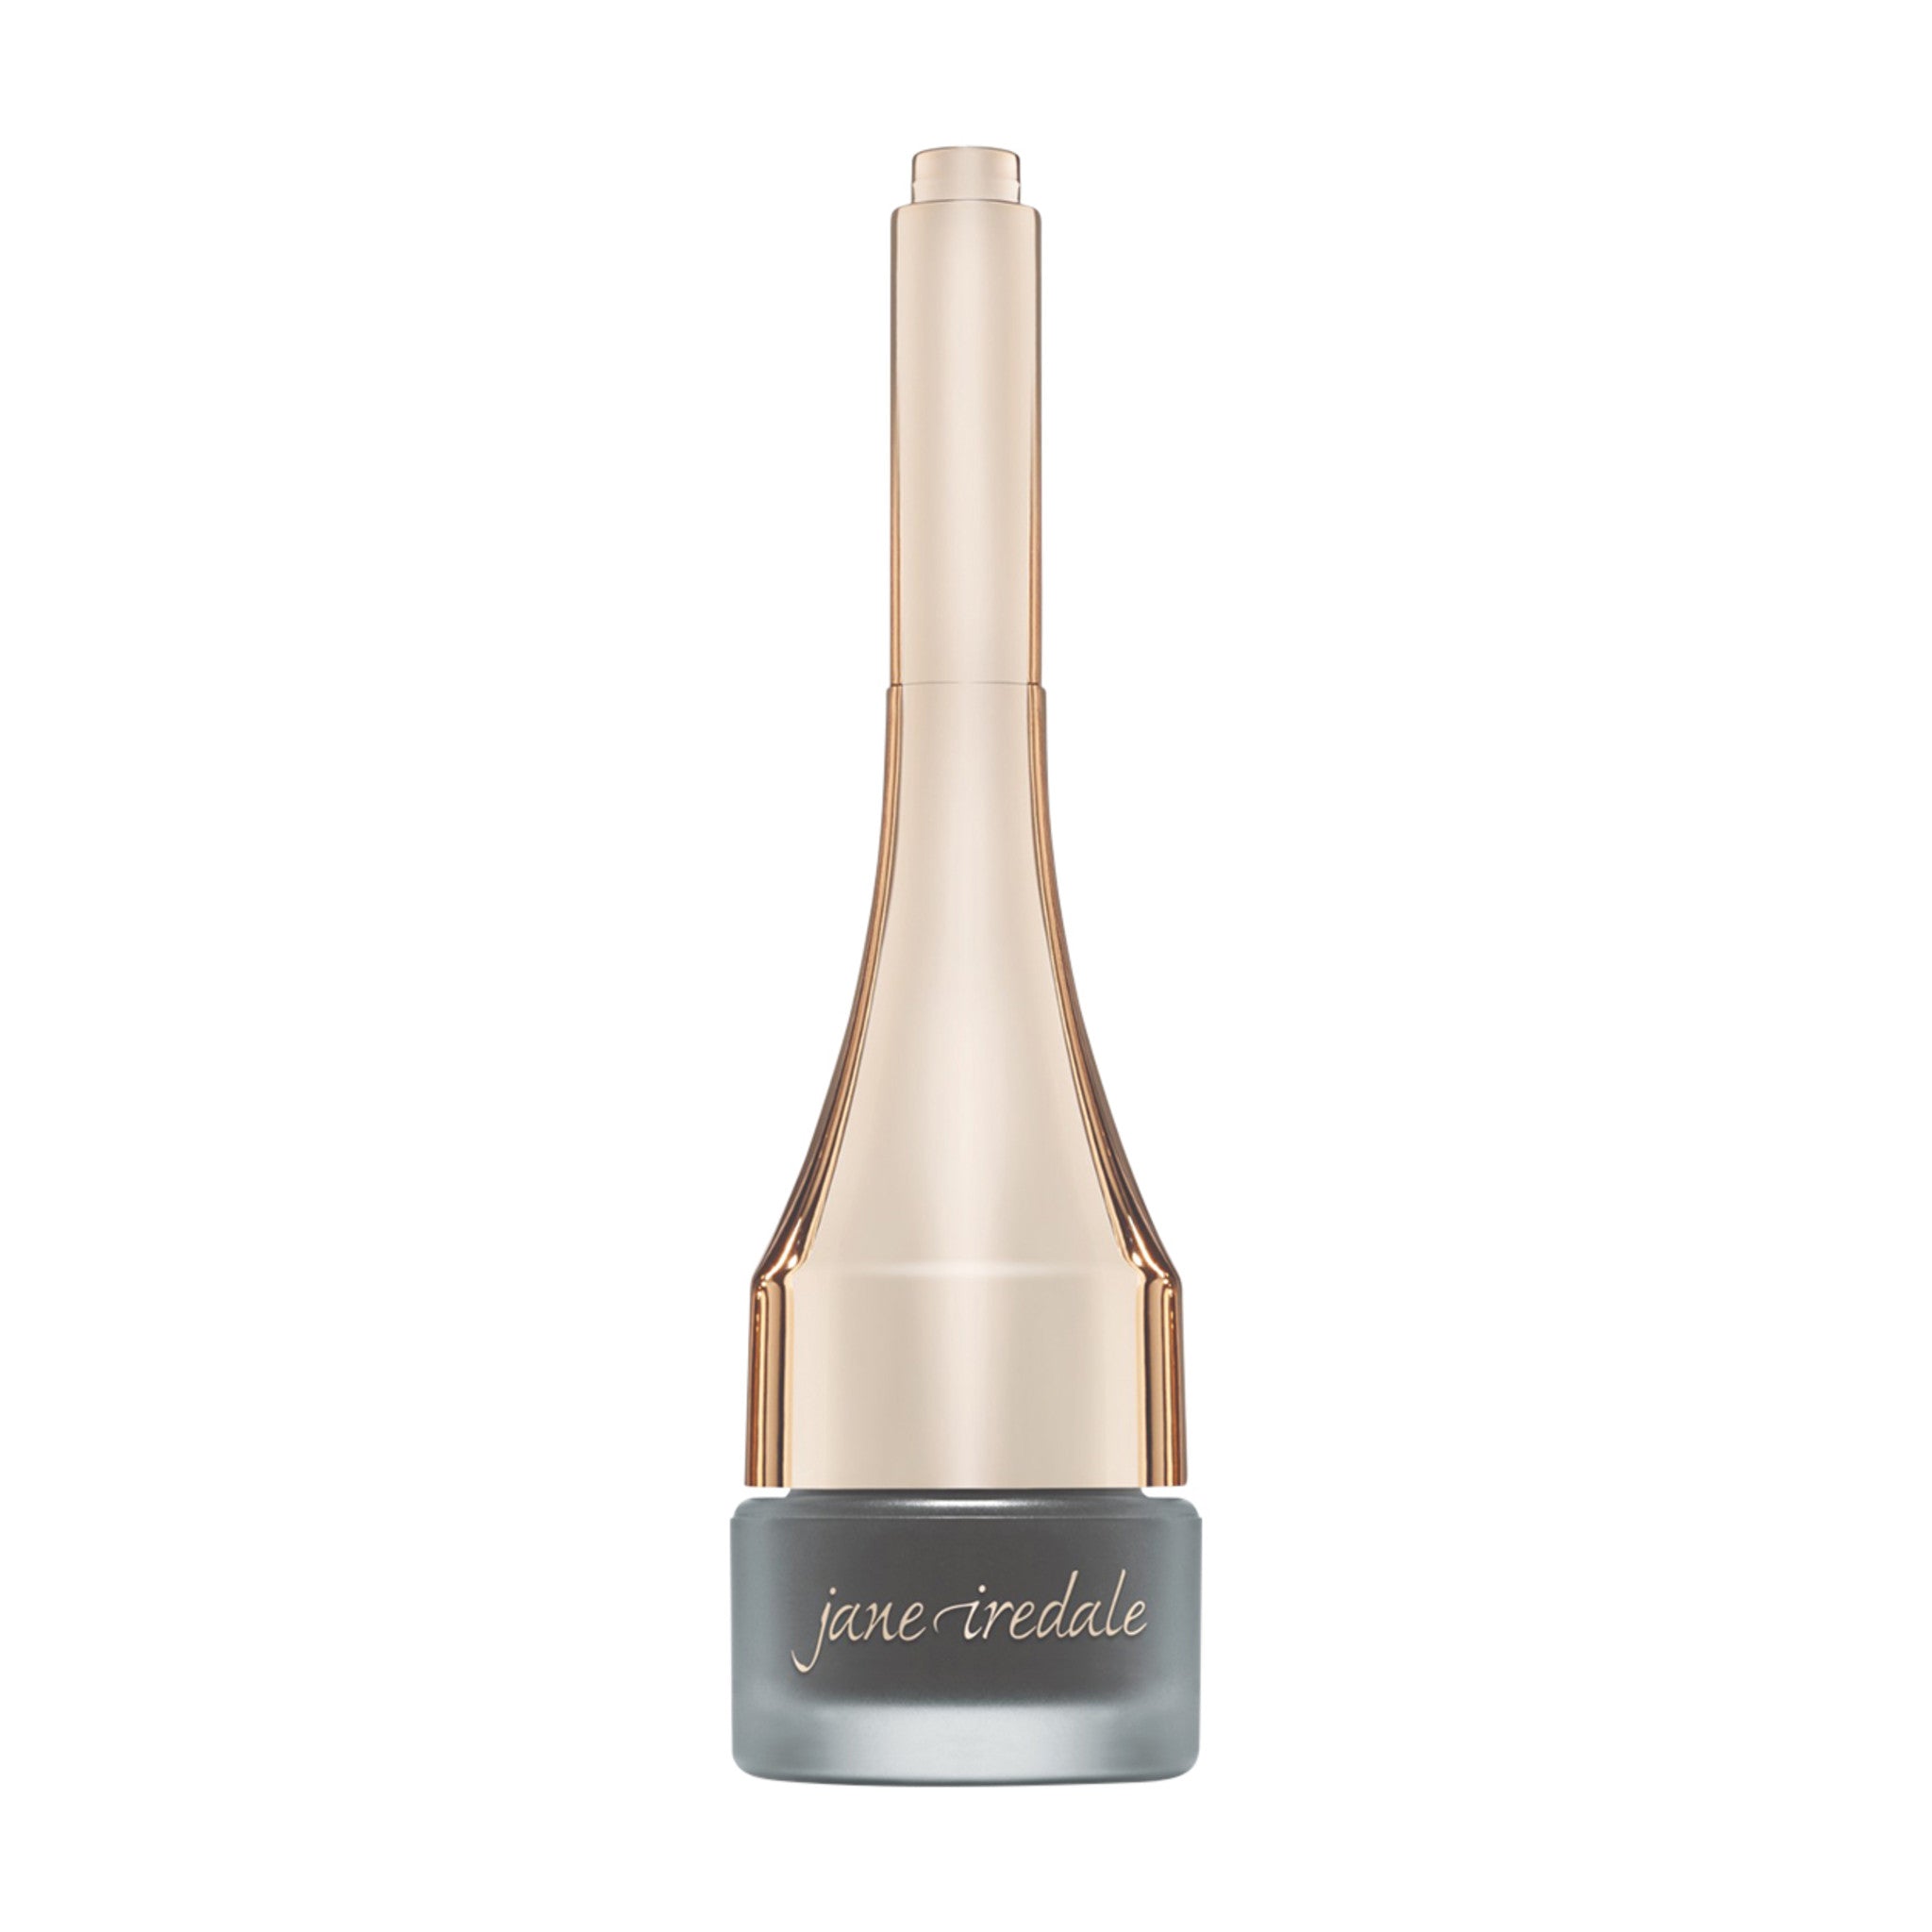 Jane Iredale Mystikol Powdered Eyeliner Color/Shade variant: Smoky Quartz main image. This product is in the color green